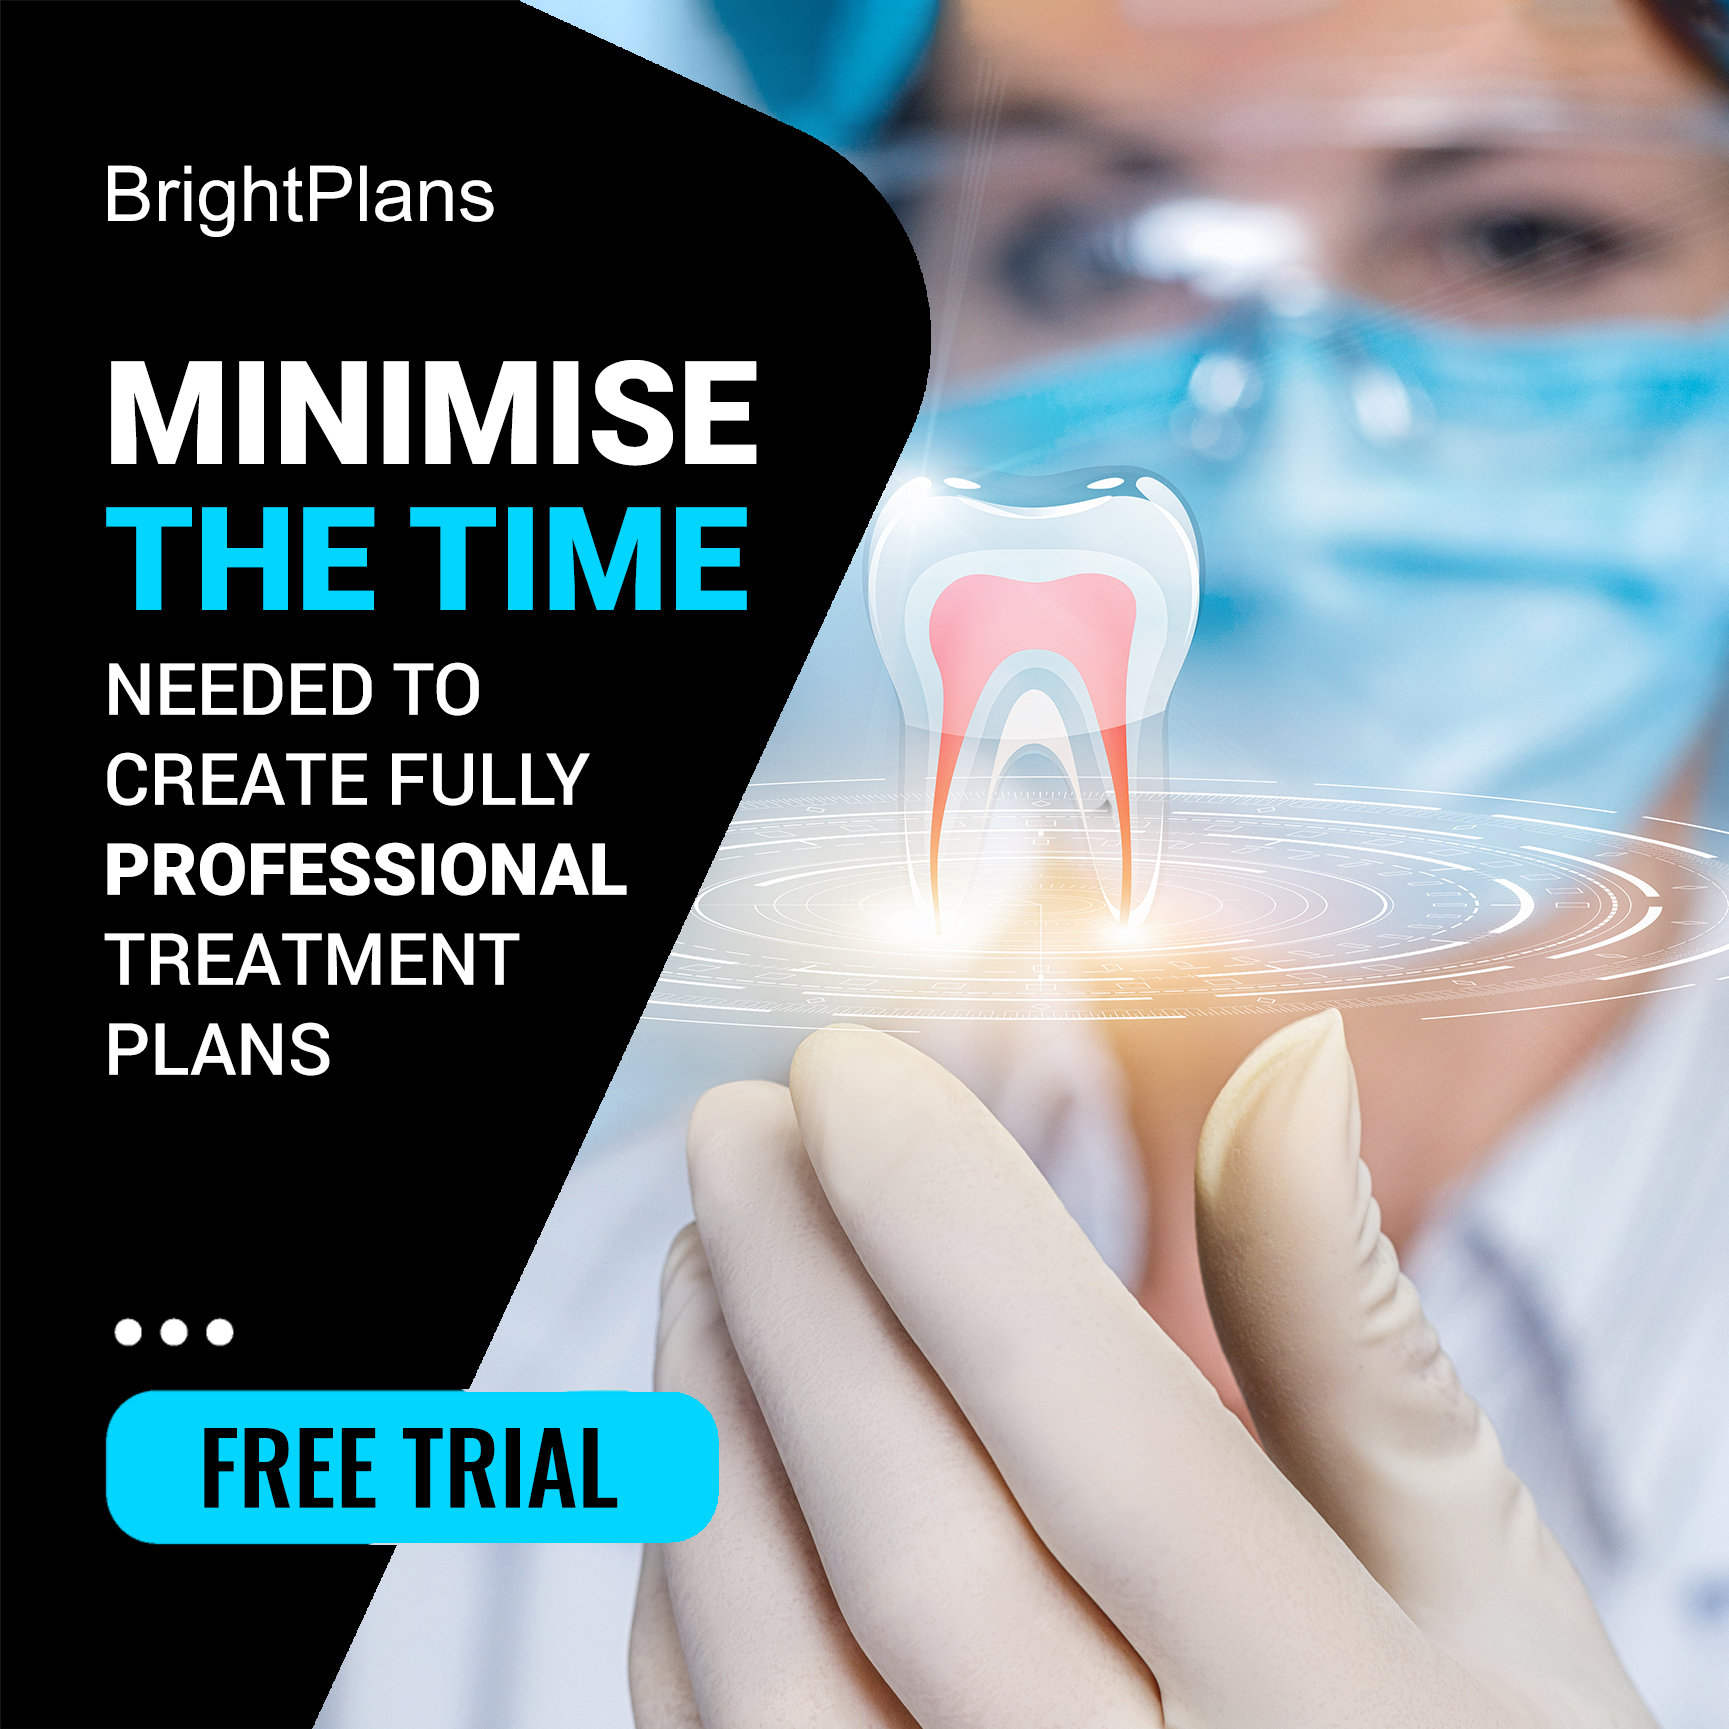 Minimize the time needed to create fully professional treatment plans